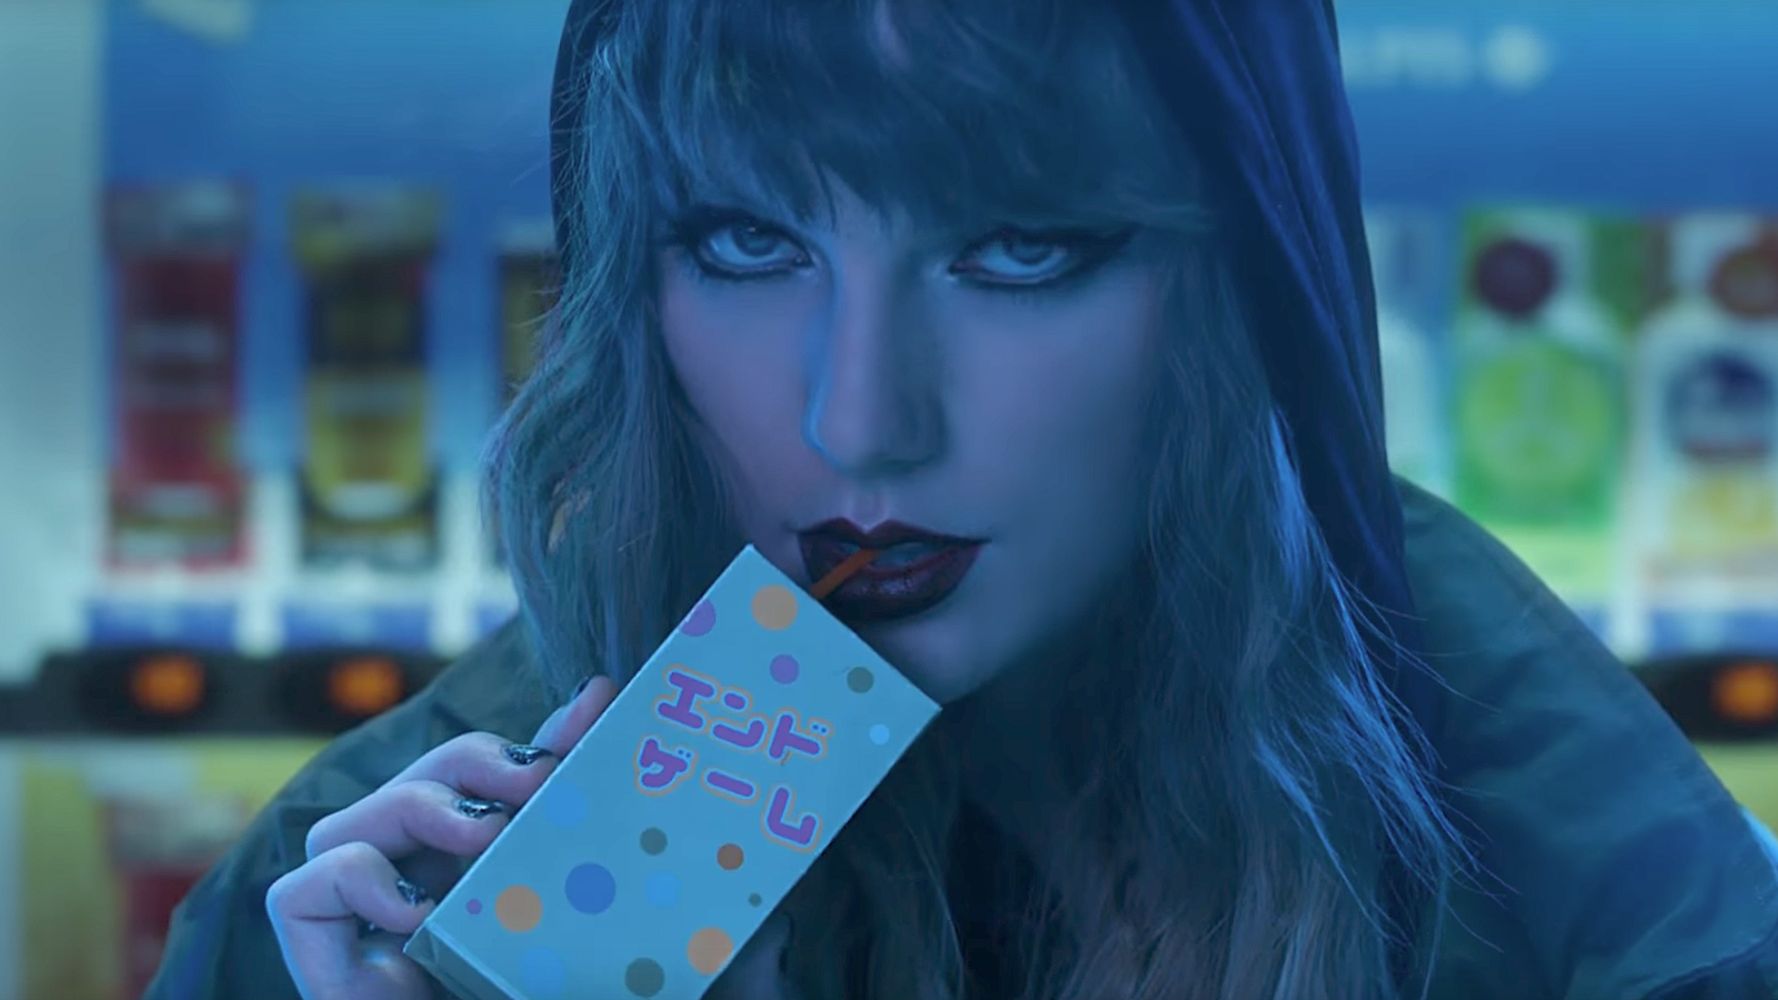 Taylor Swift Lives Up To Her Big Reputation In New 'End Game' Mus...